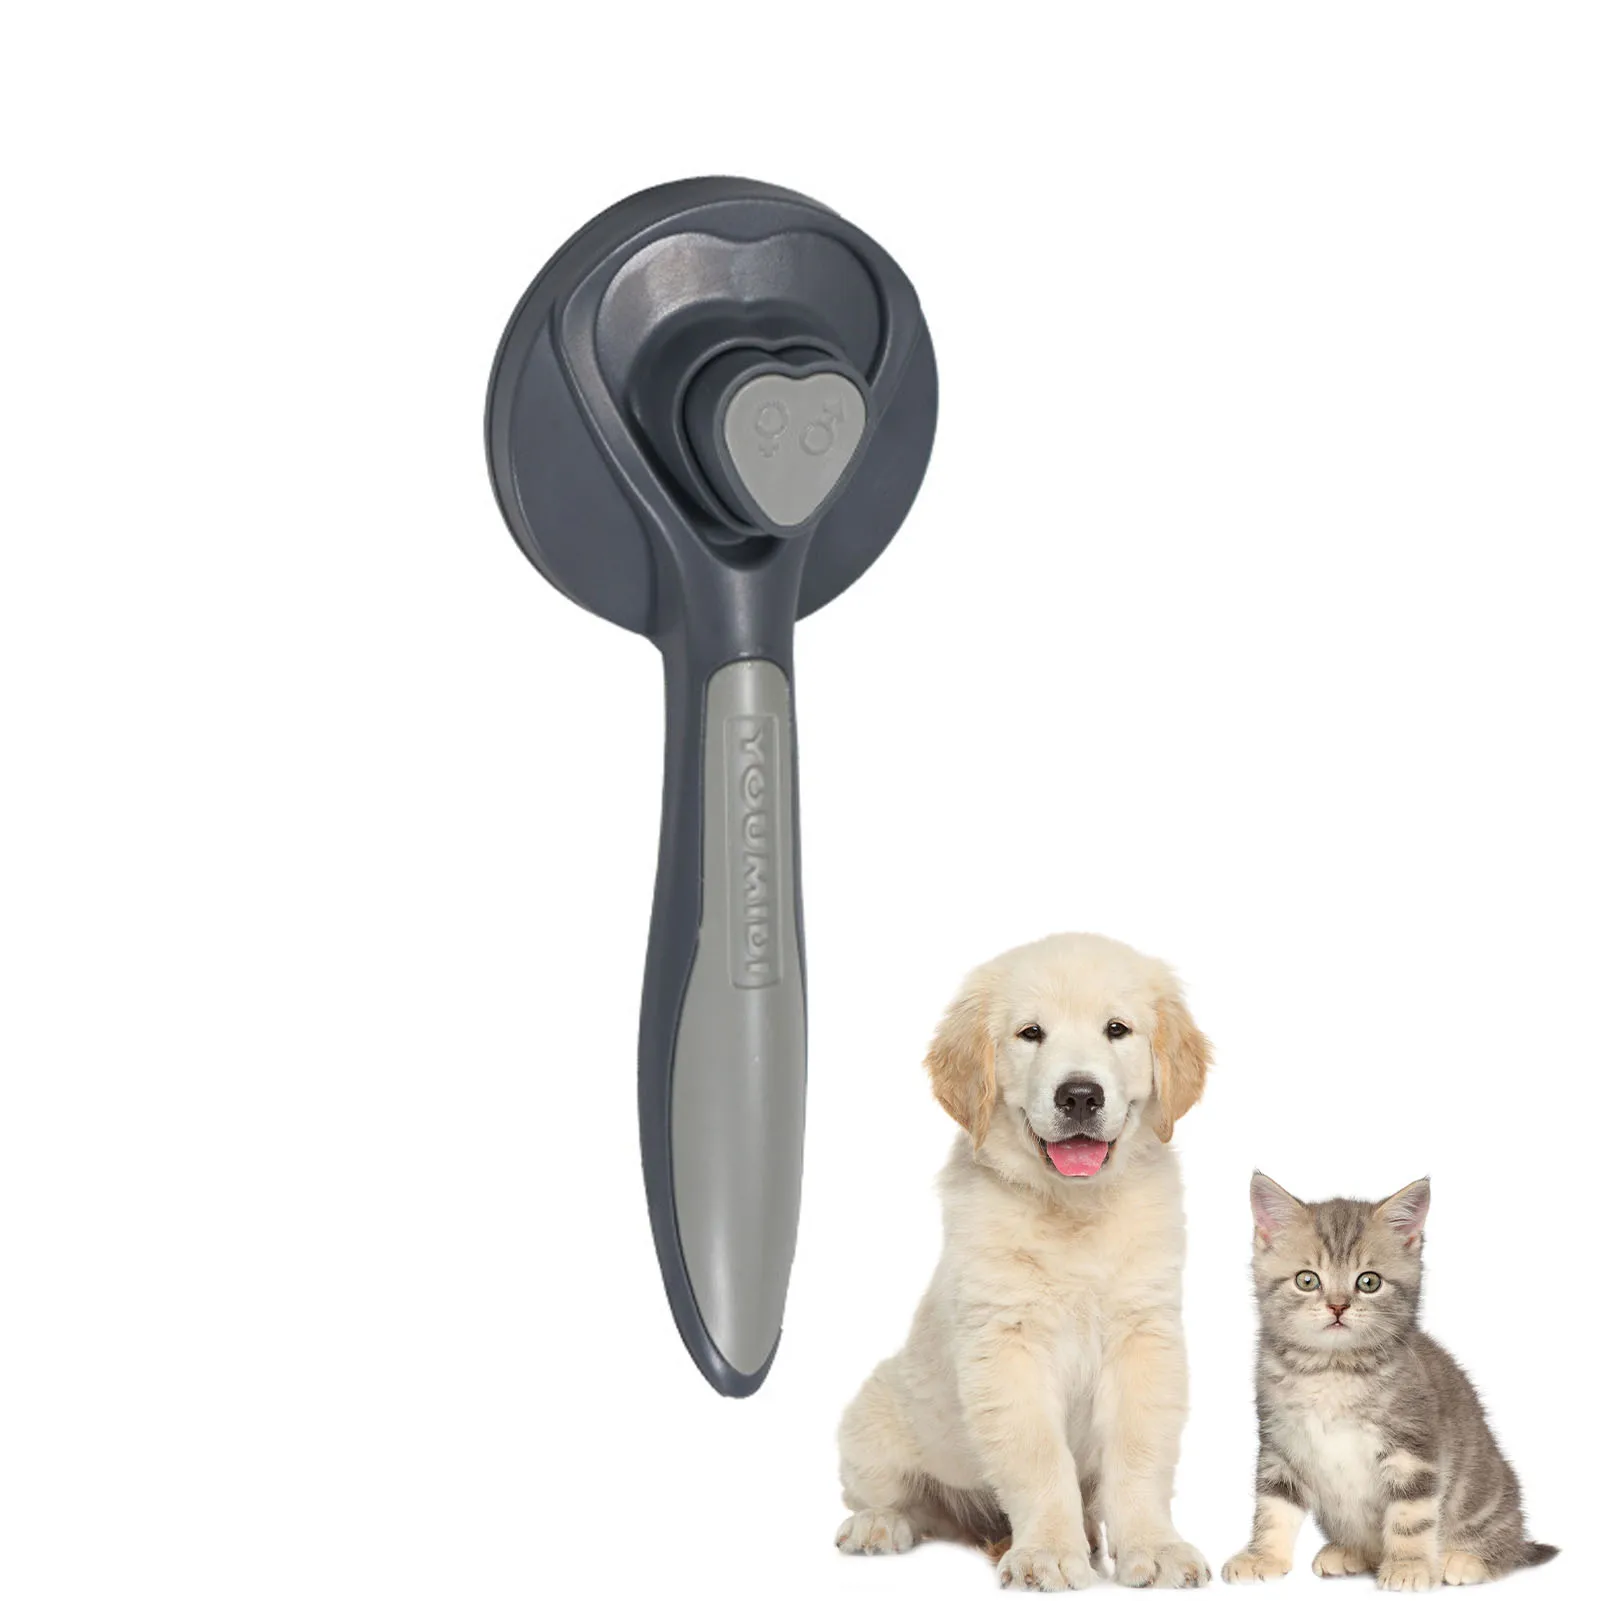 

Self Cleaning Slicker Brush For Dogs And Cats Pet Grooming Tool Removes Undercoat Shedding Mats And Tangled Hair